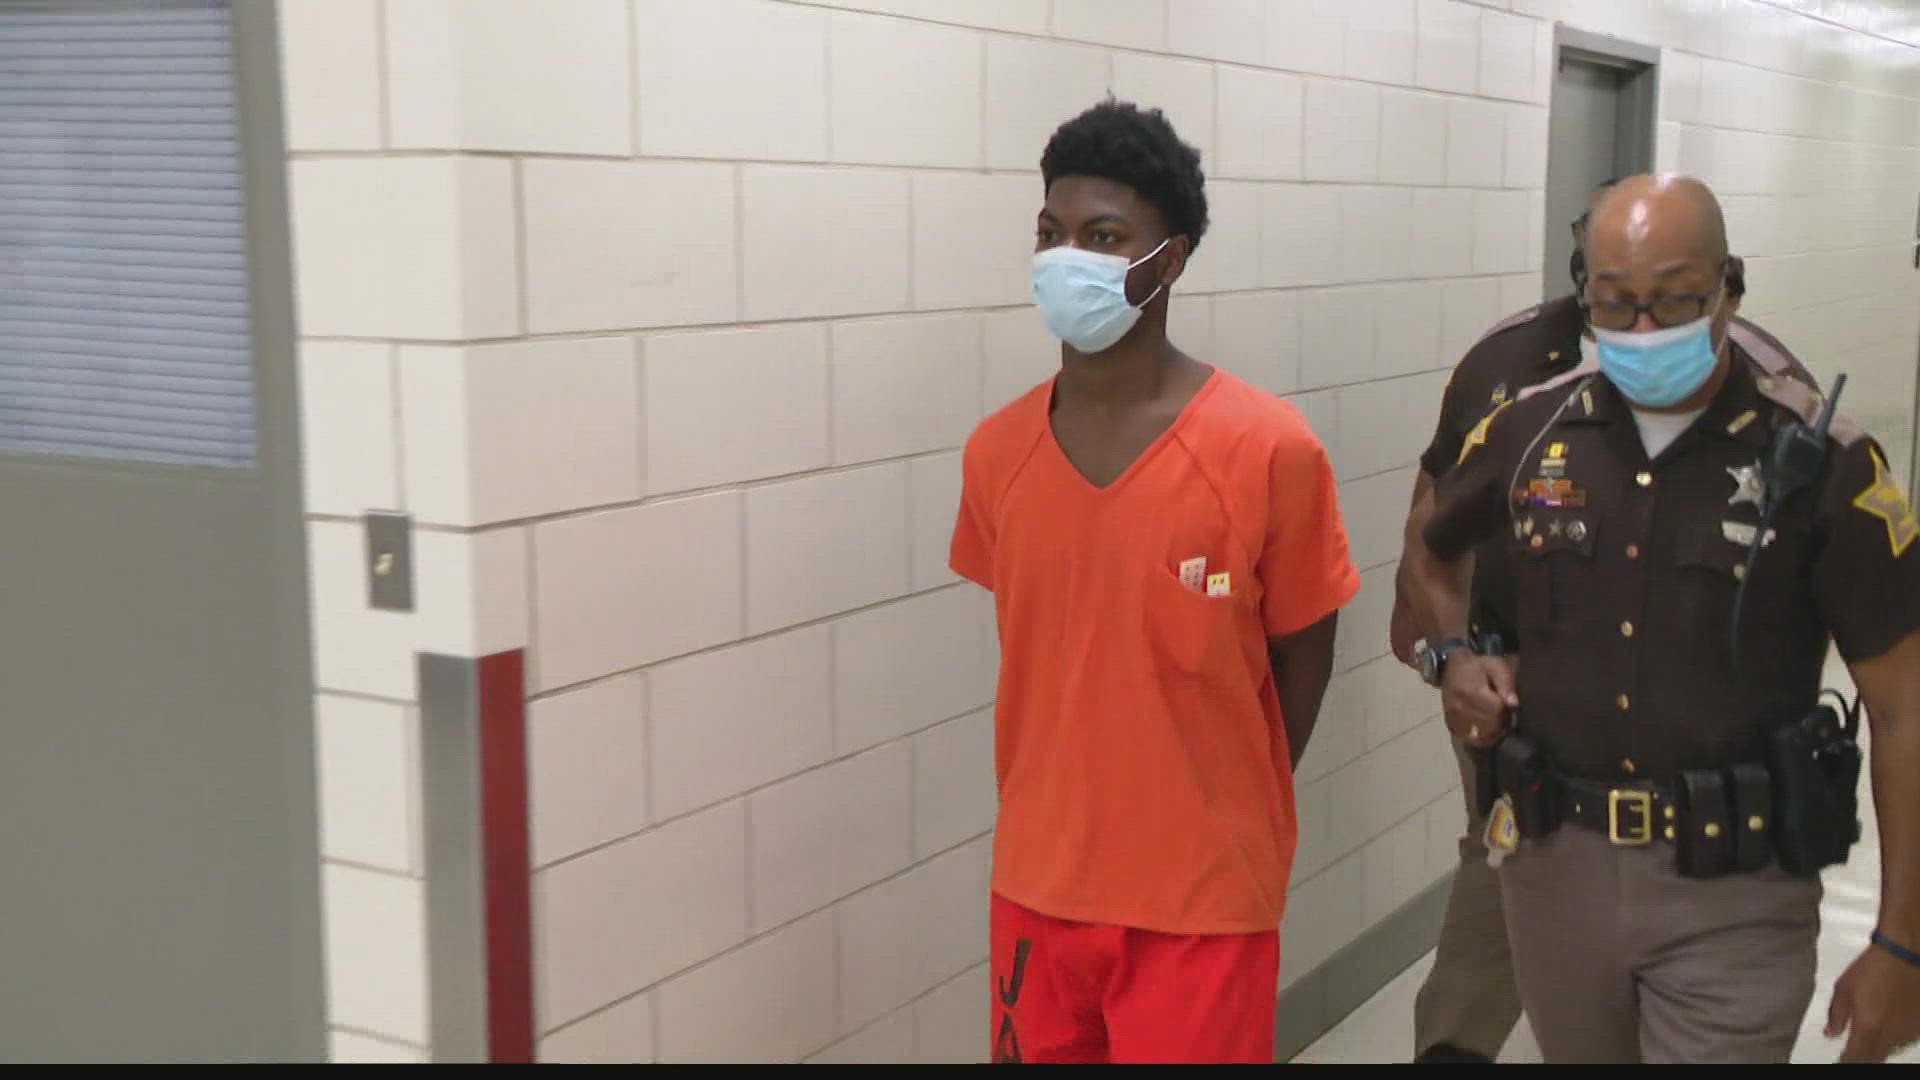 Wyatt Maxey, a North Central H.S. senior accused of stabbing a classmate during a fight, made his first court appearance Tuesday.